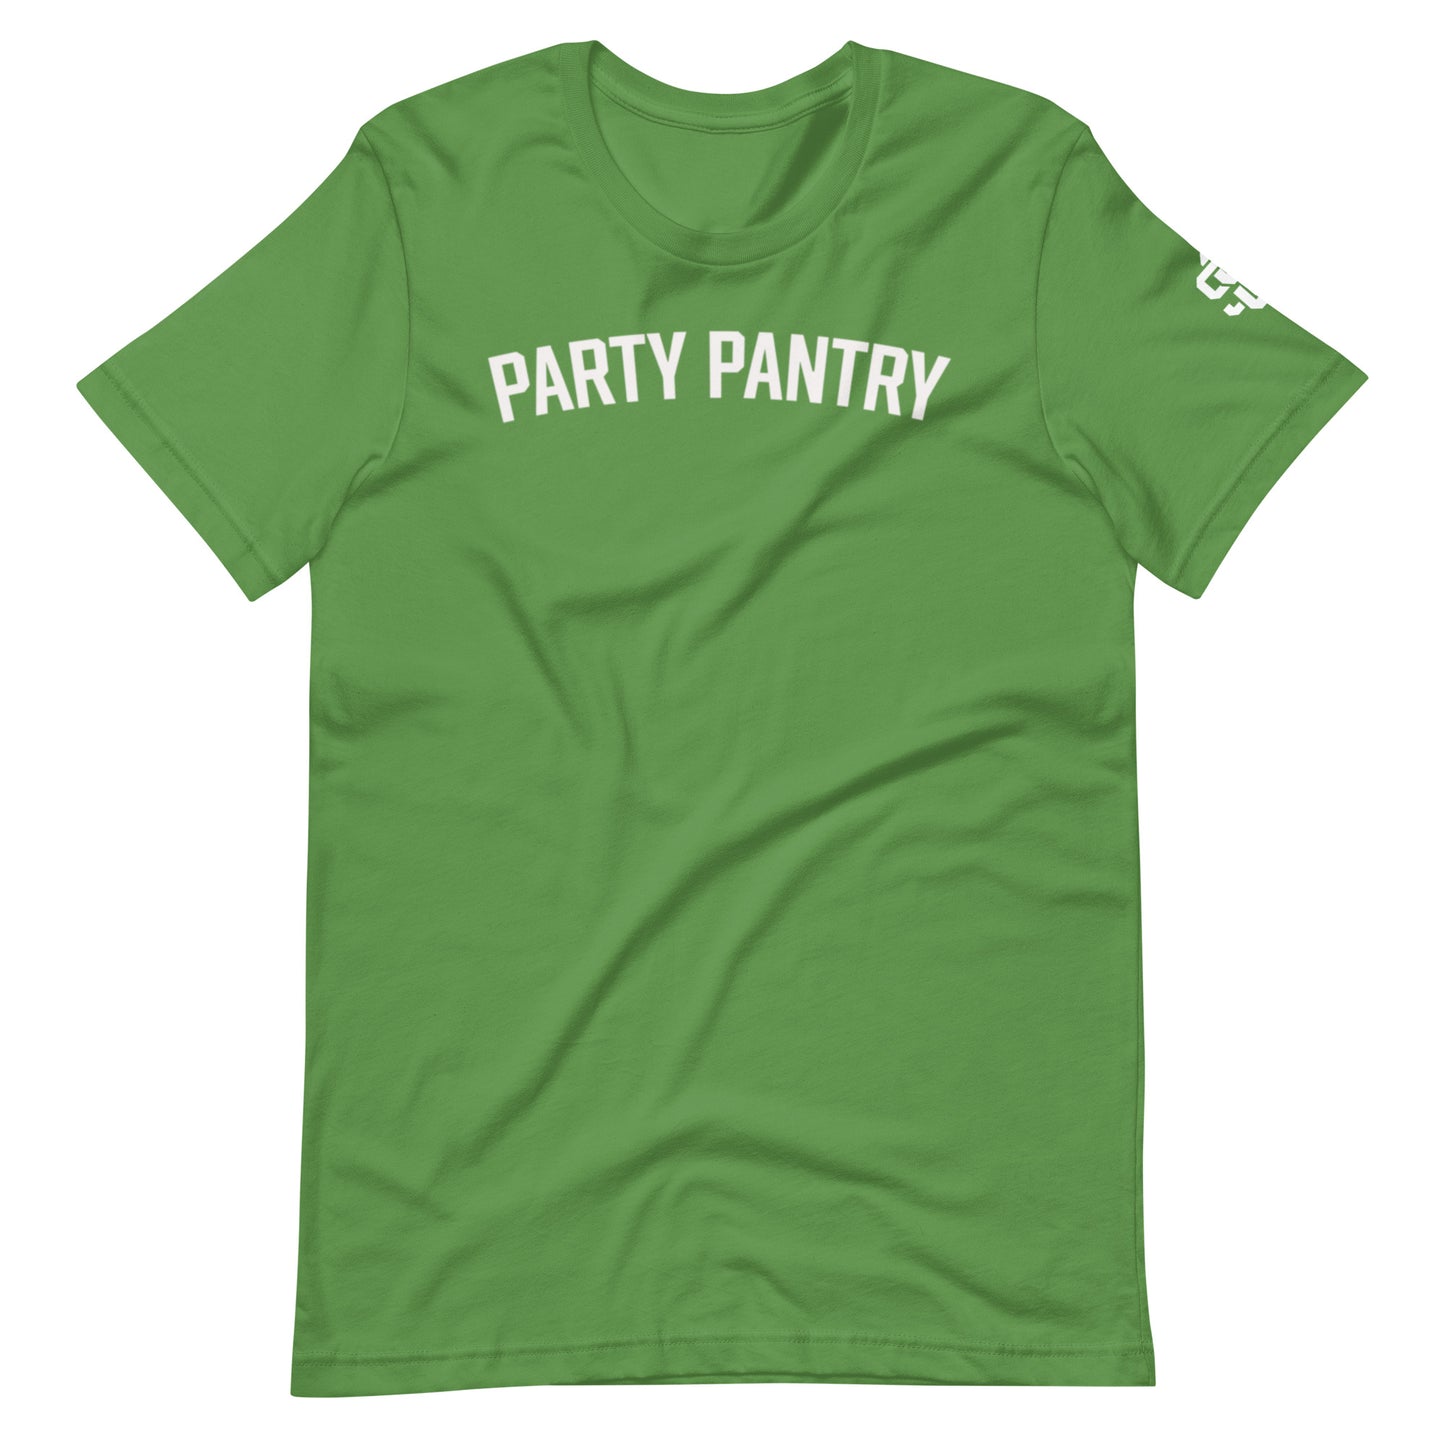 Party Pantry T-Shirt